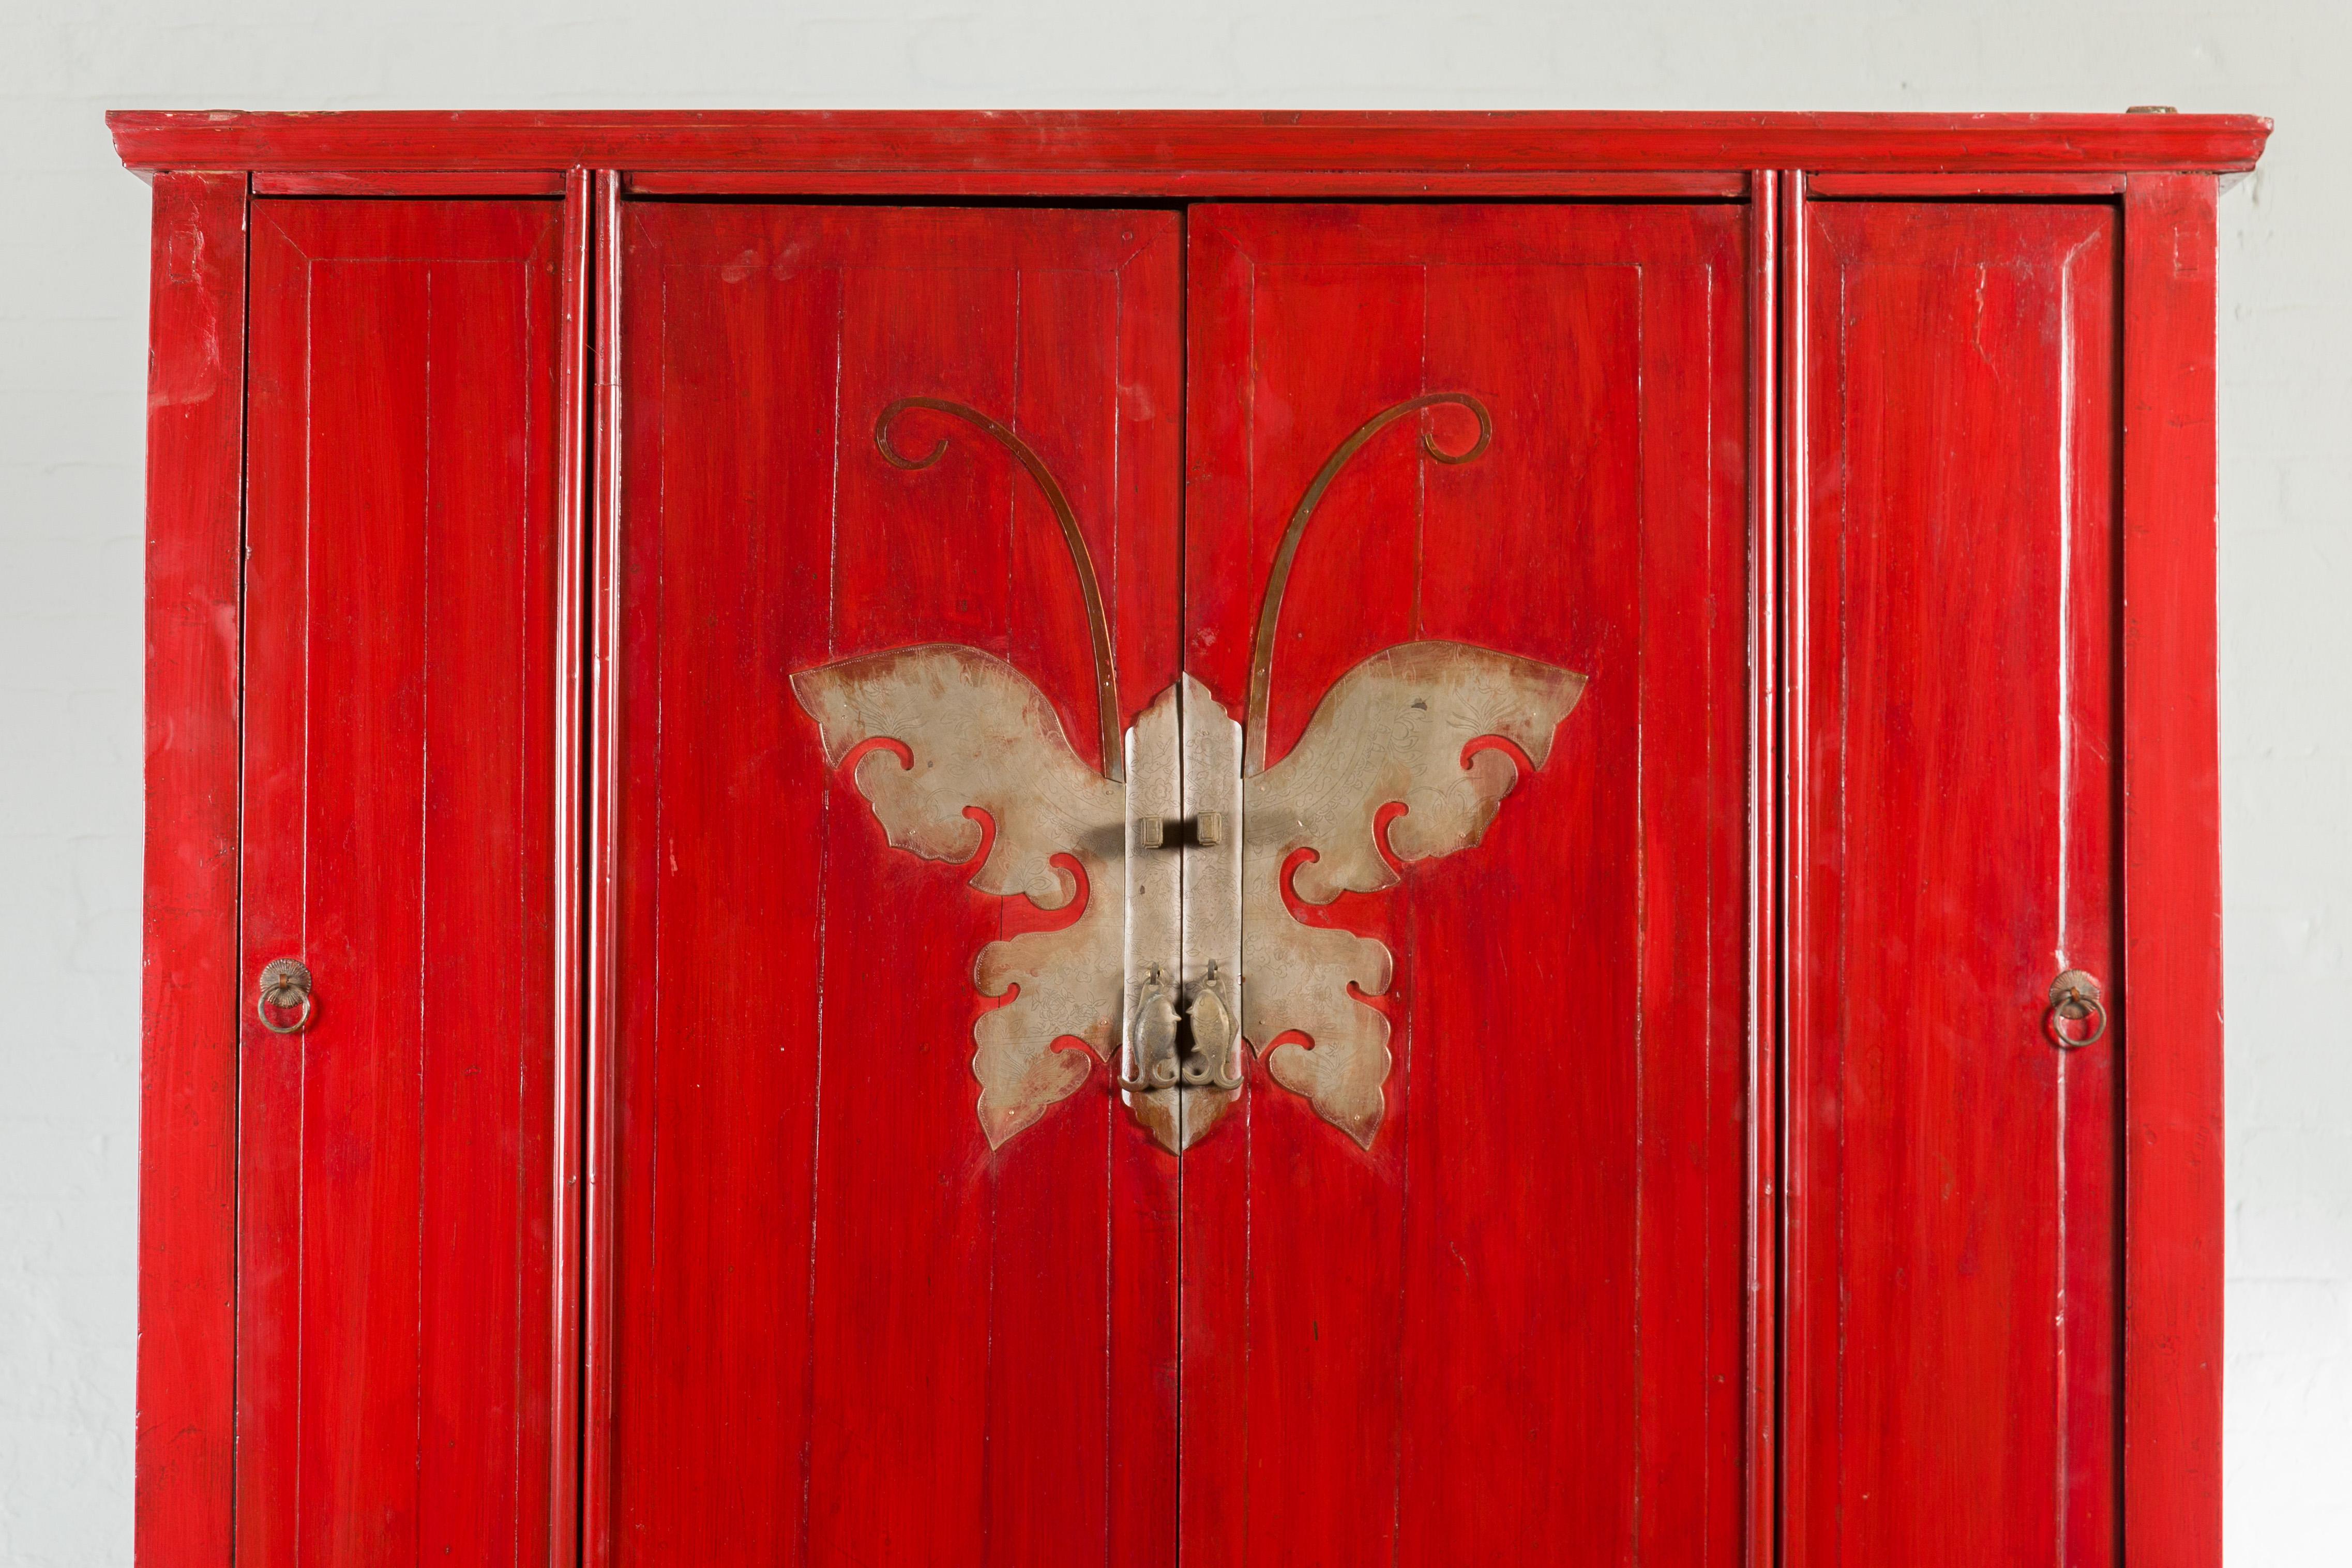 A Chinese Qing Dynasty Ningbo red lacquered four-door wedding cabinet from the 19th century, with butterfly hardware. Created in Eastern China during the Qing Dynasty, this wedding cabinet captures our attention with its stunning red lacquered